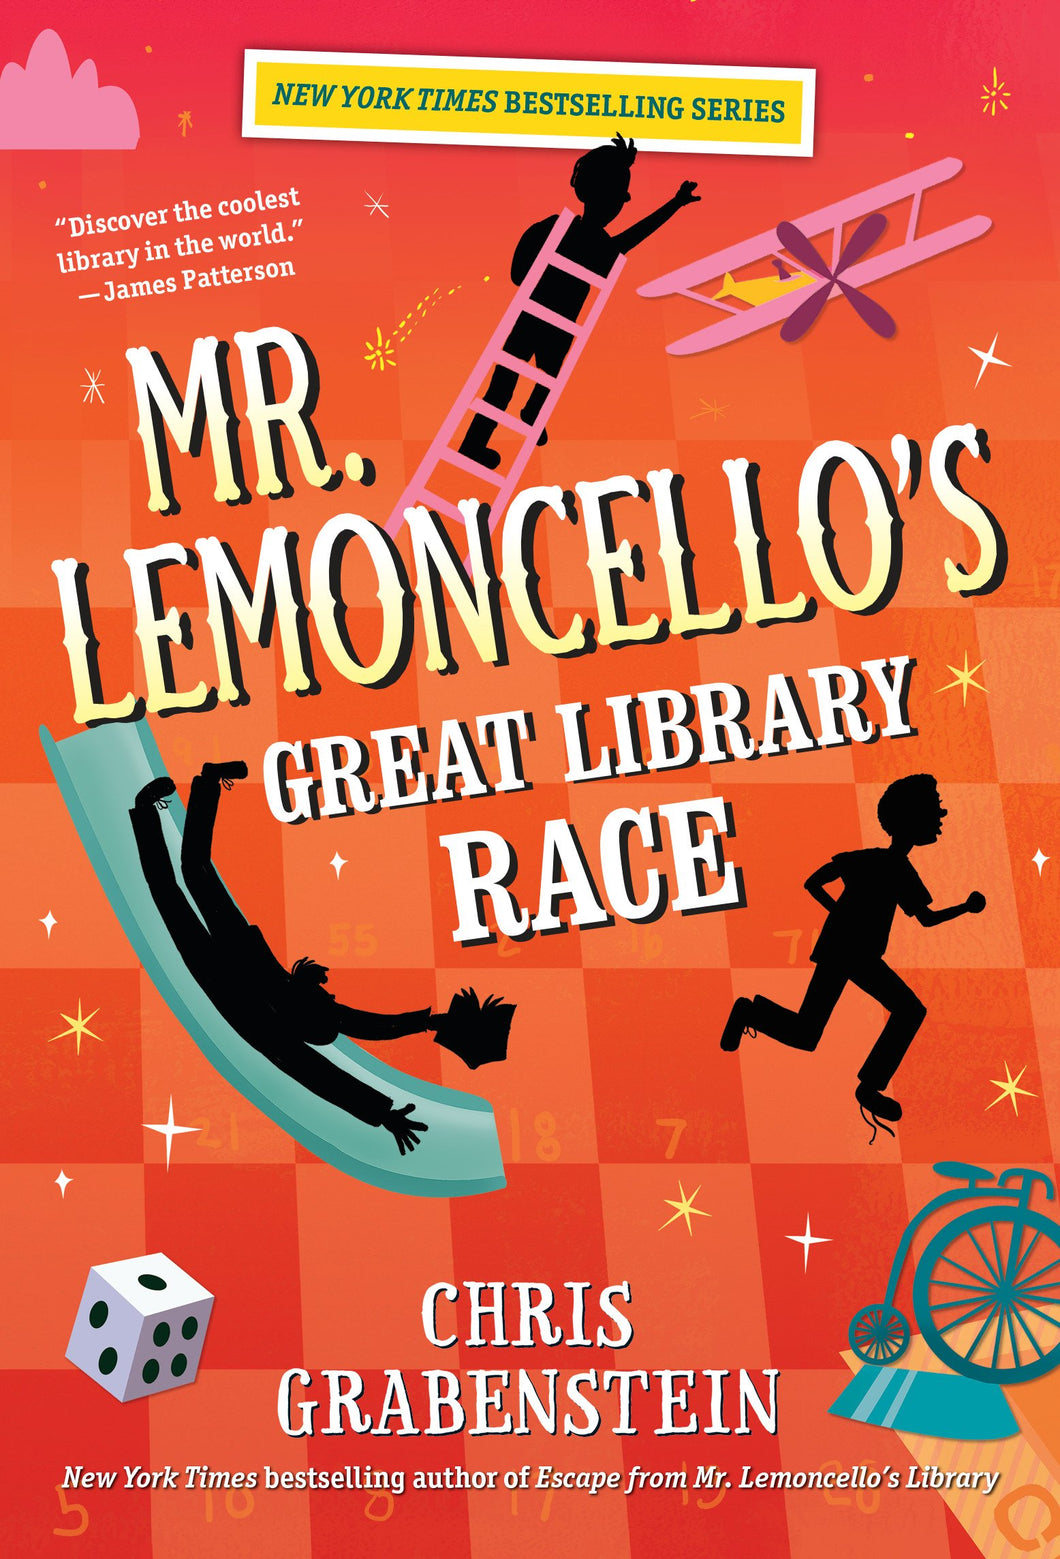 Mr. Lemoncello's Great Library Race (Book 3)